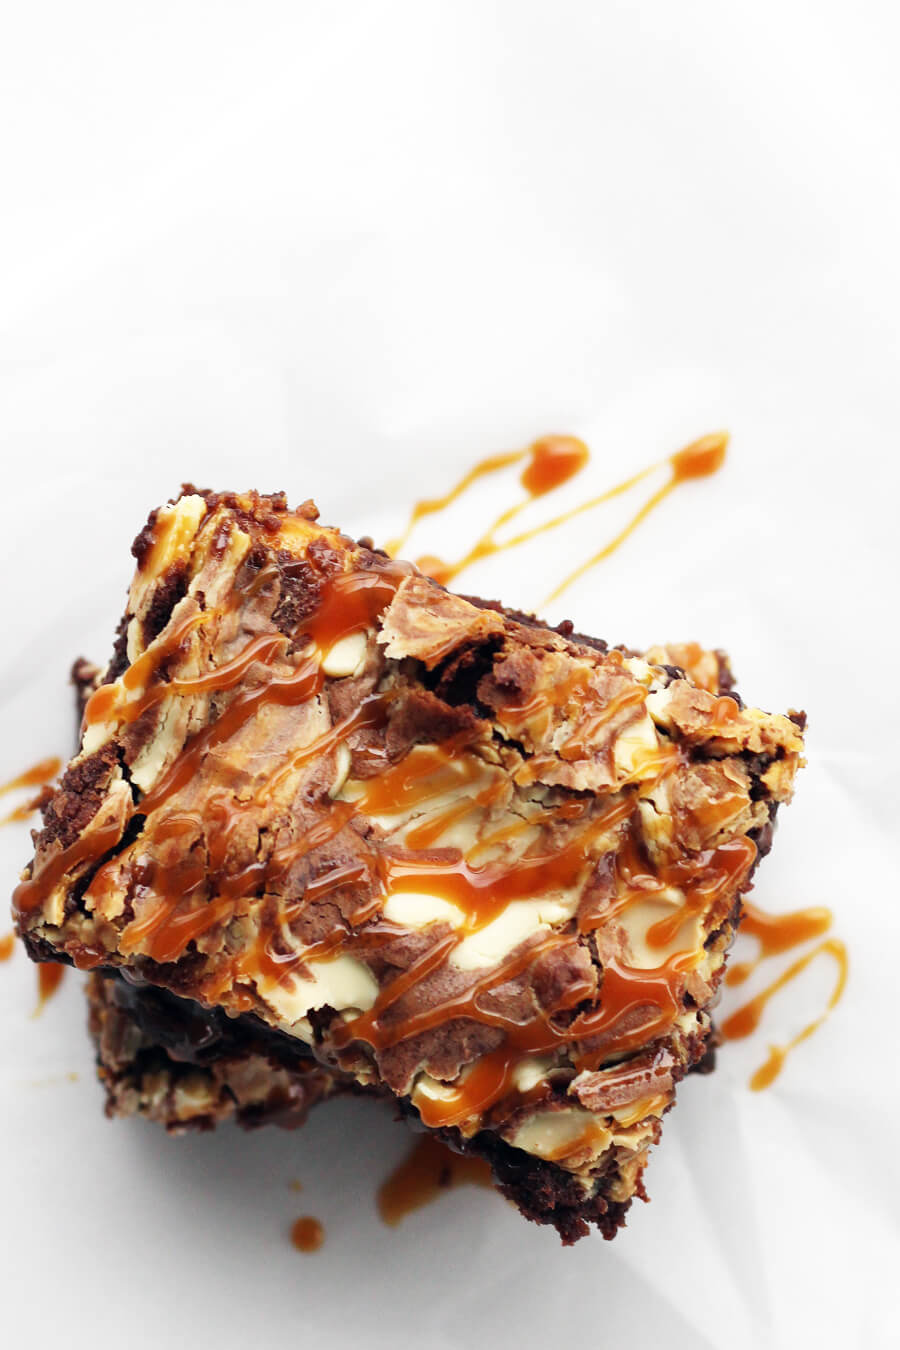 Vanilla Swirl Dark Chocolate Brownies + Salted Caramel Drizzle | Buy This Cook That